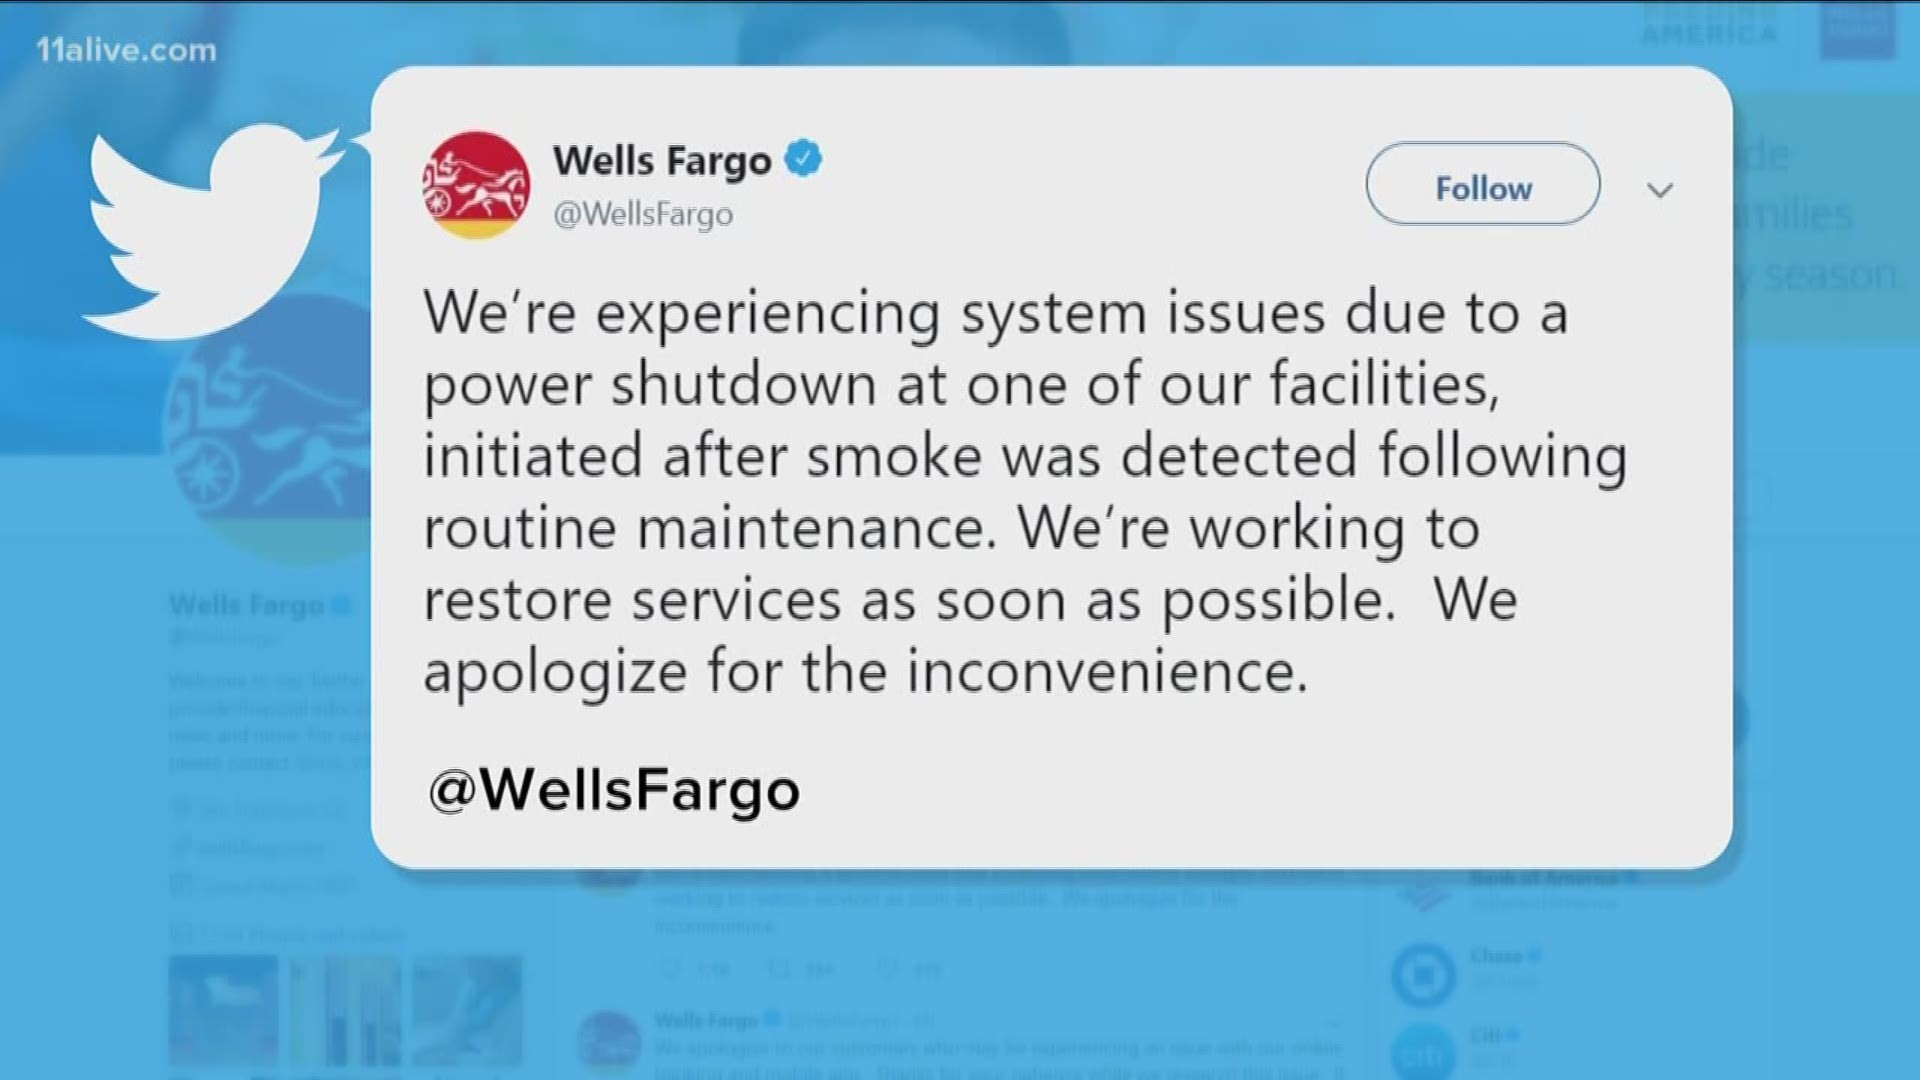 The banks sent a tweet saying “We apologize to our customers who may be experiencing an issue with our online banking and mobile app. Thanks for your patience while we research this issue. If you are impacted, please check back here for updates.”